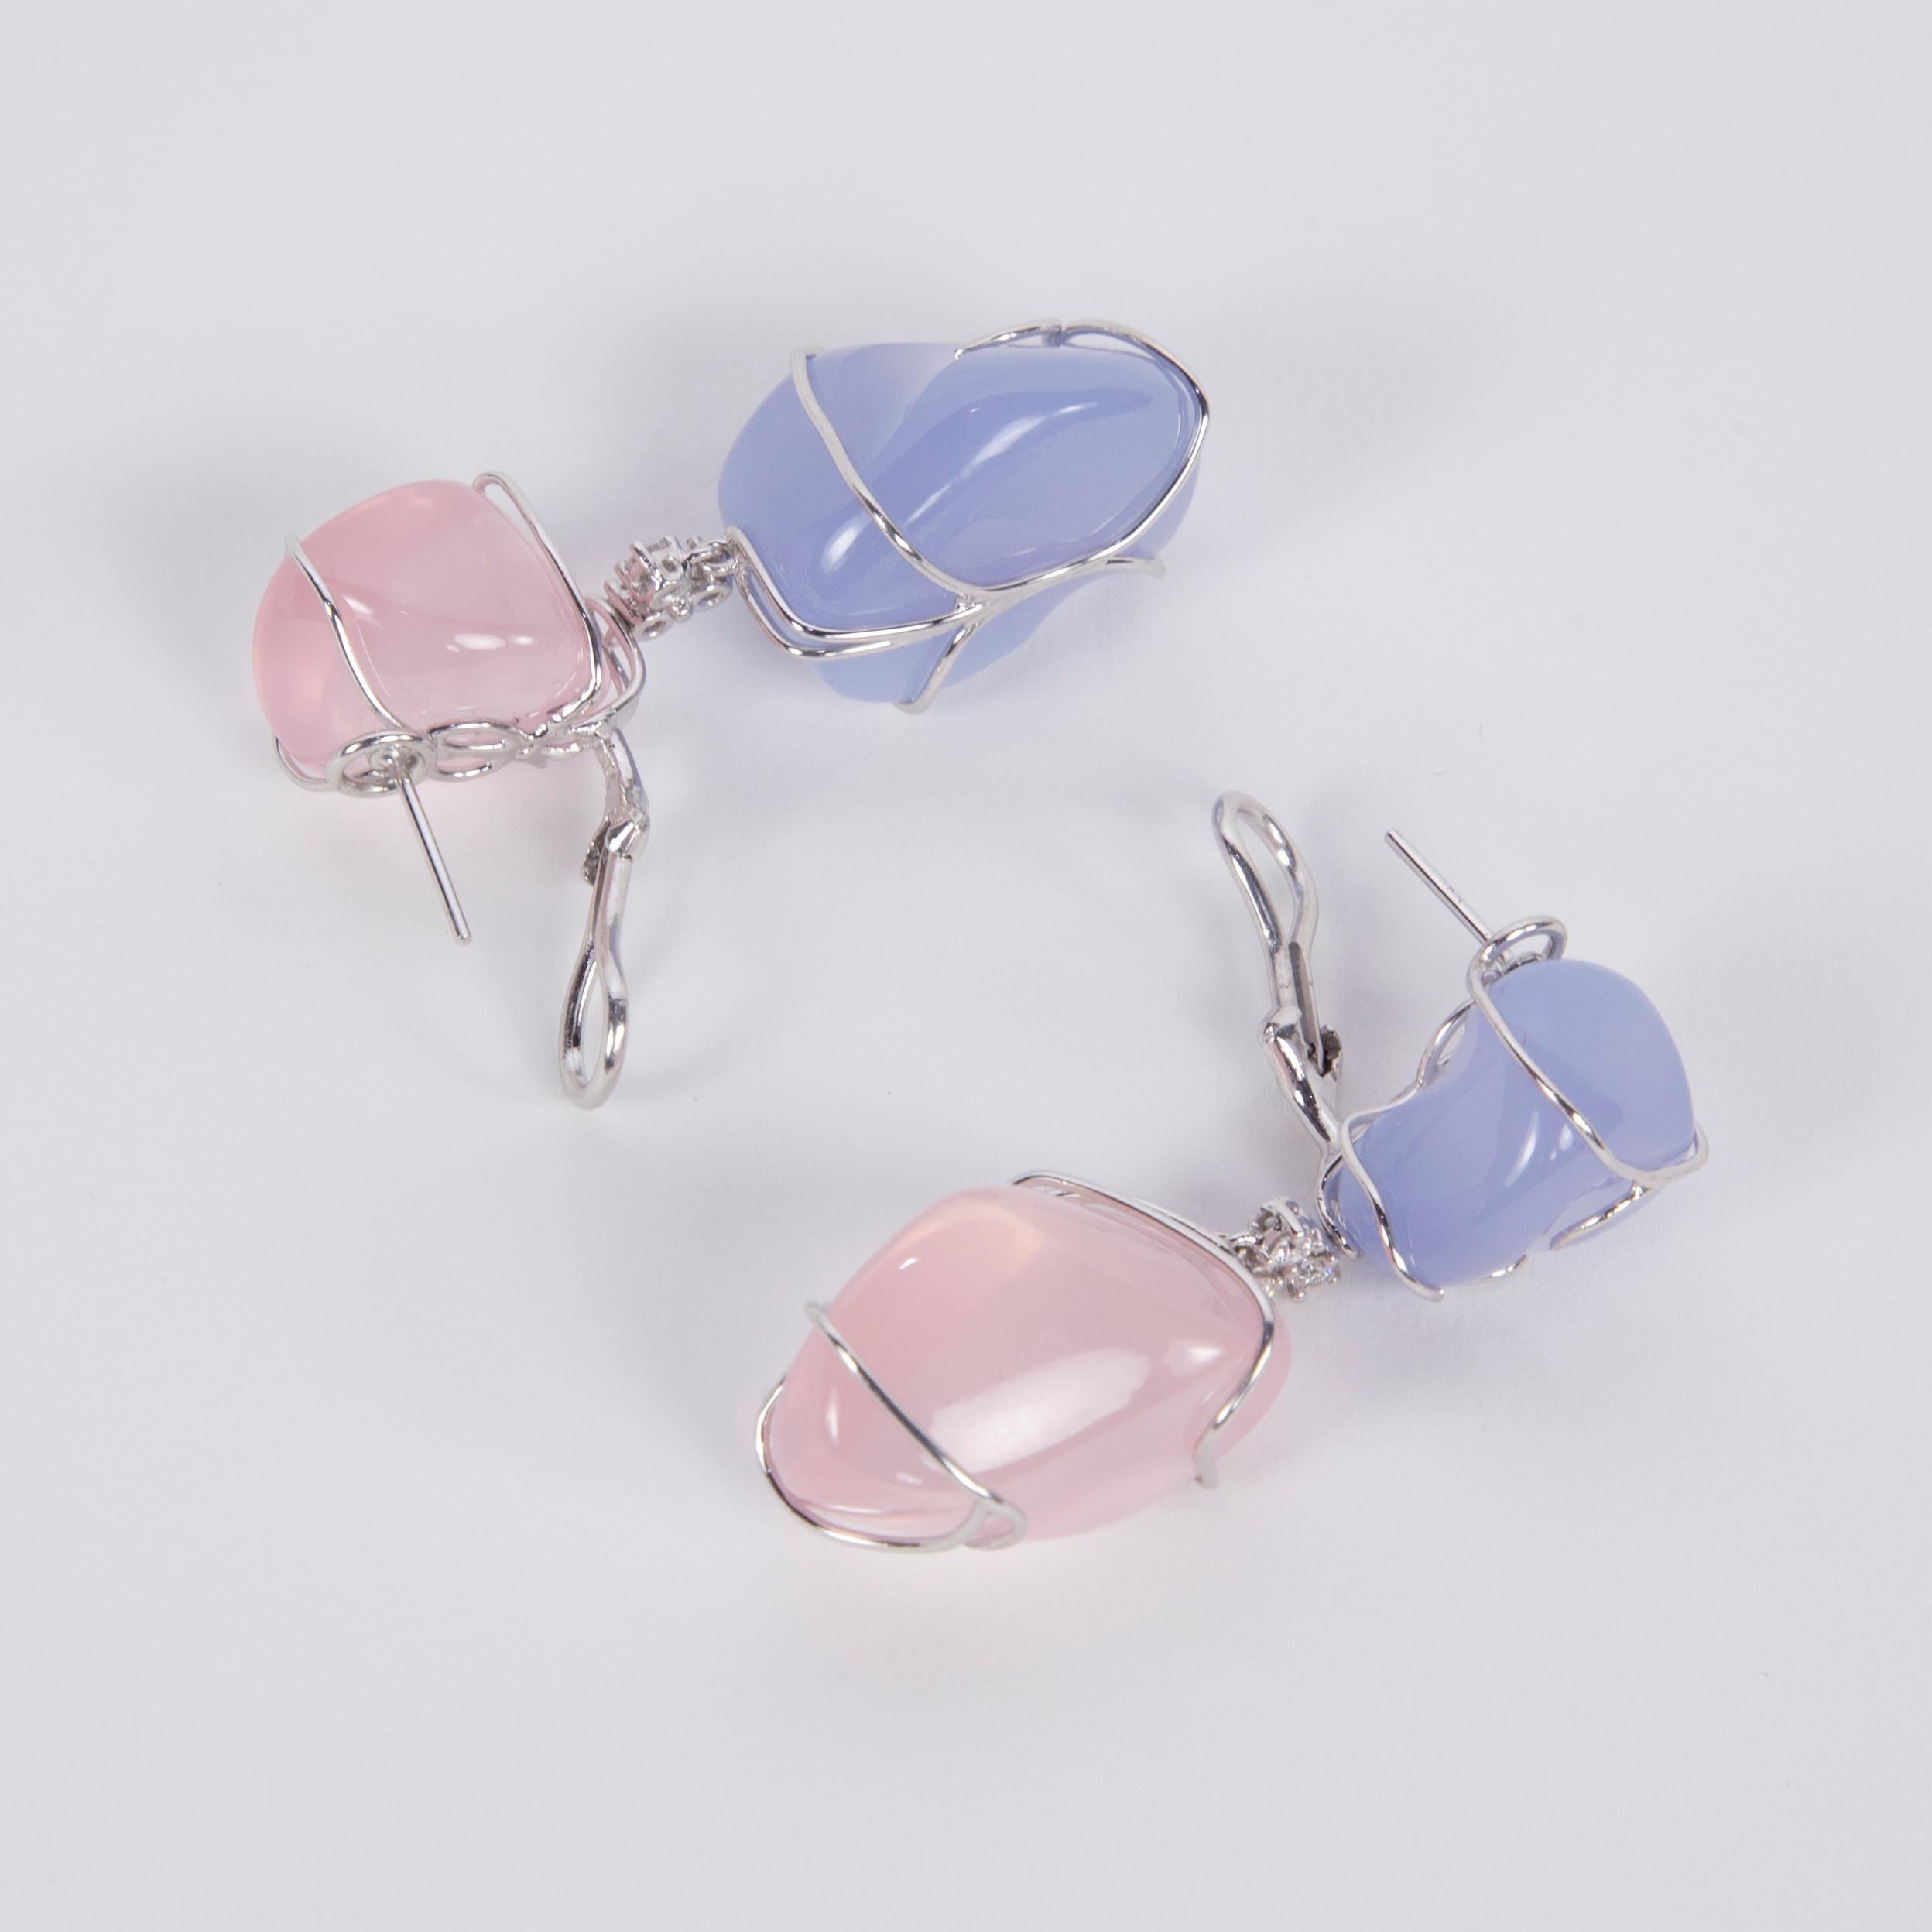 Fabulous Free-form Chalcedony and Pink Quartz Diamond Drop Earrings; hand crafted in 18k white gold; featuring 2 free-form cabochon Chalcedony 2 free-form cabochon Pink Quartz; each earring inter-spaced with 3 round brilliant cut Diamonds